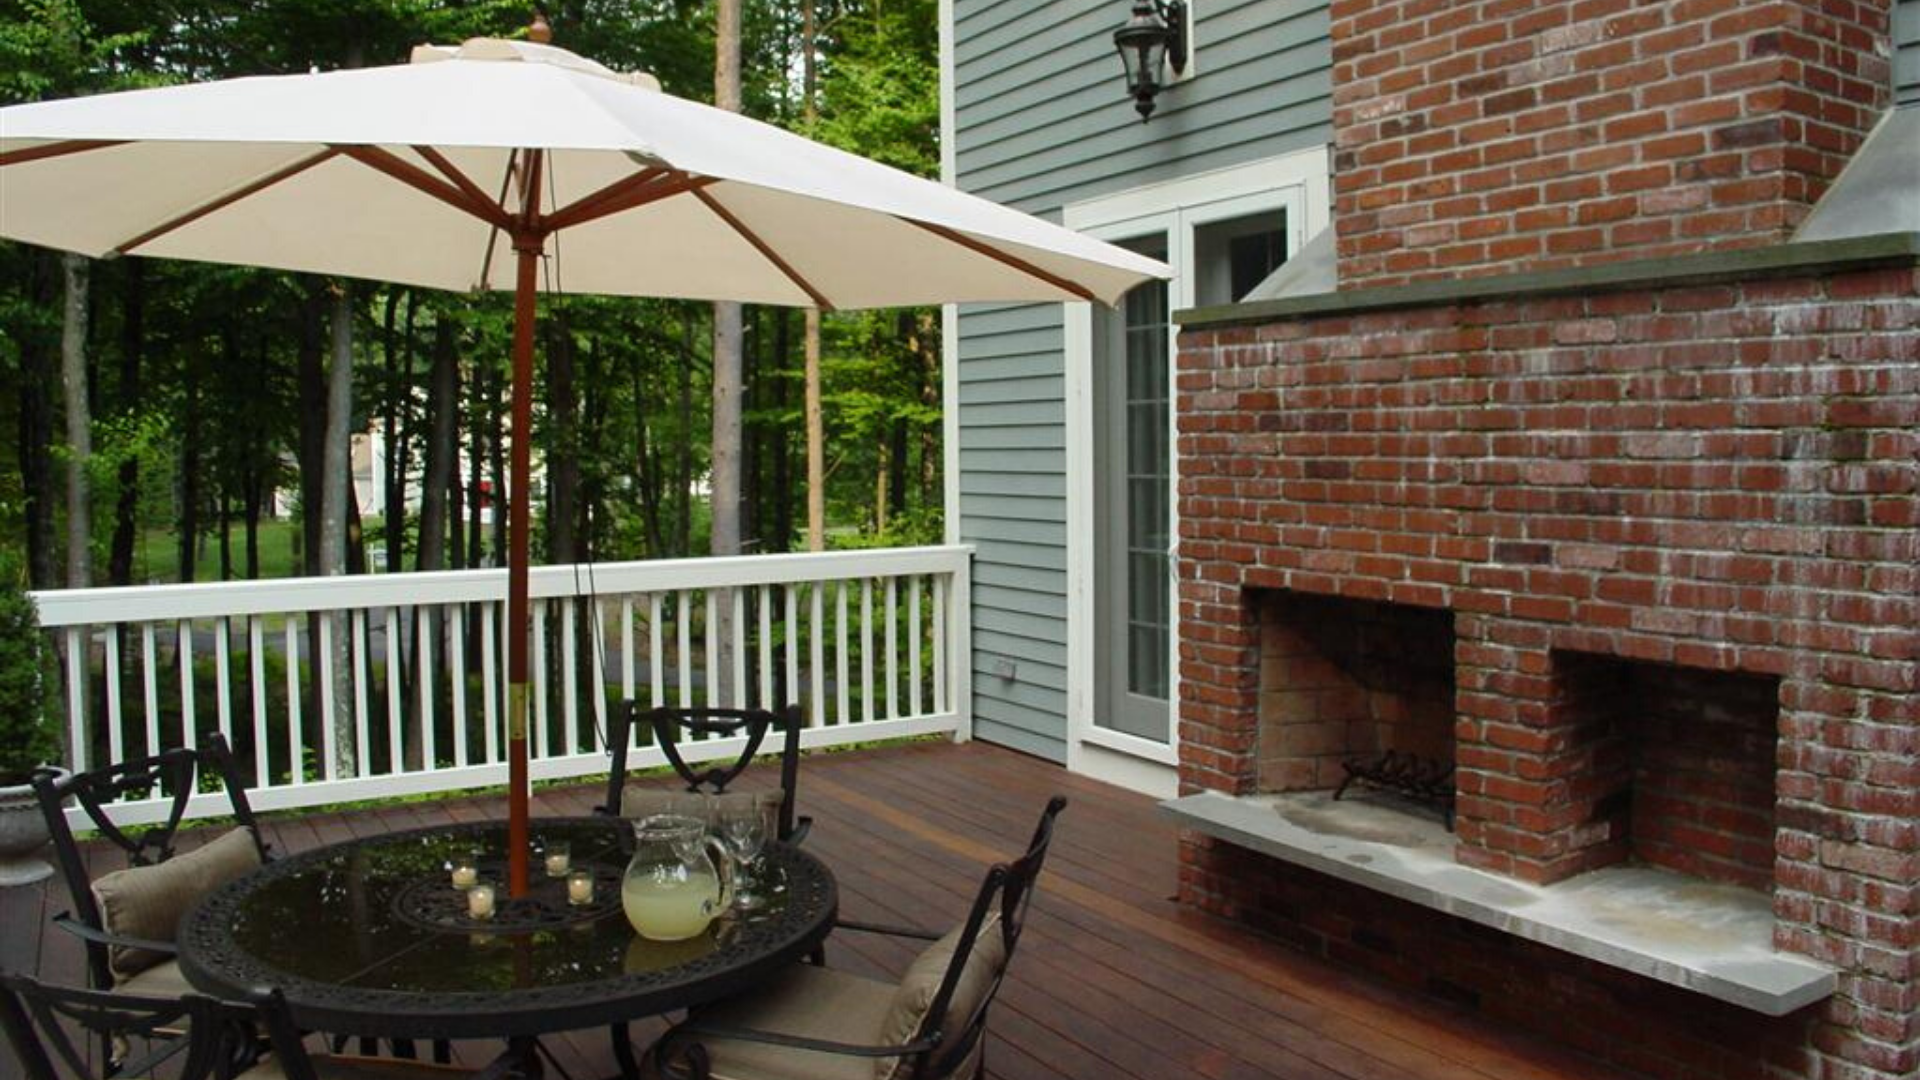 WANT TO ENTERTAIN MORE OUTDOORS?